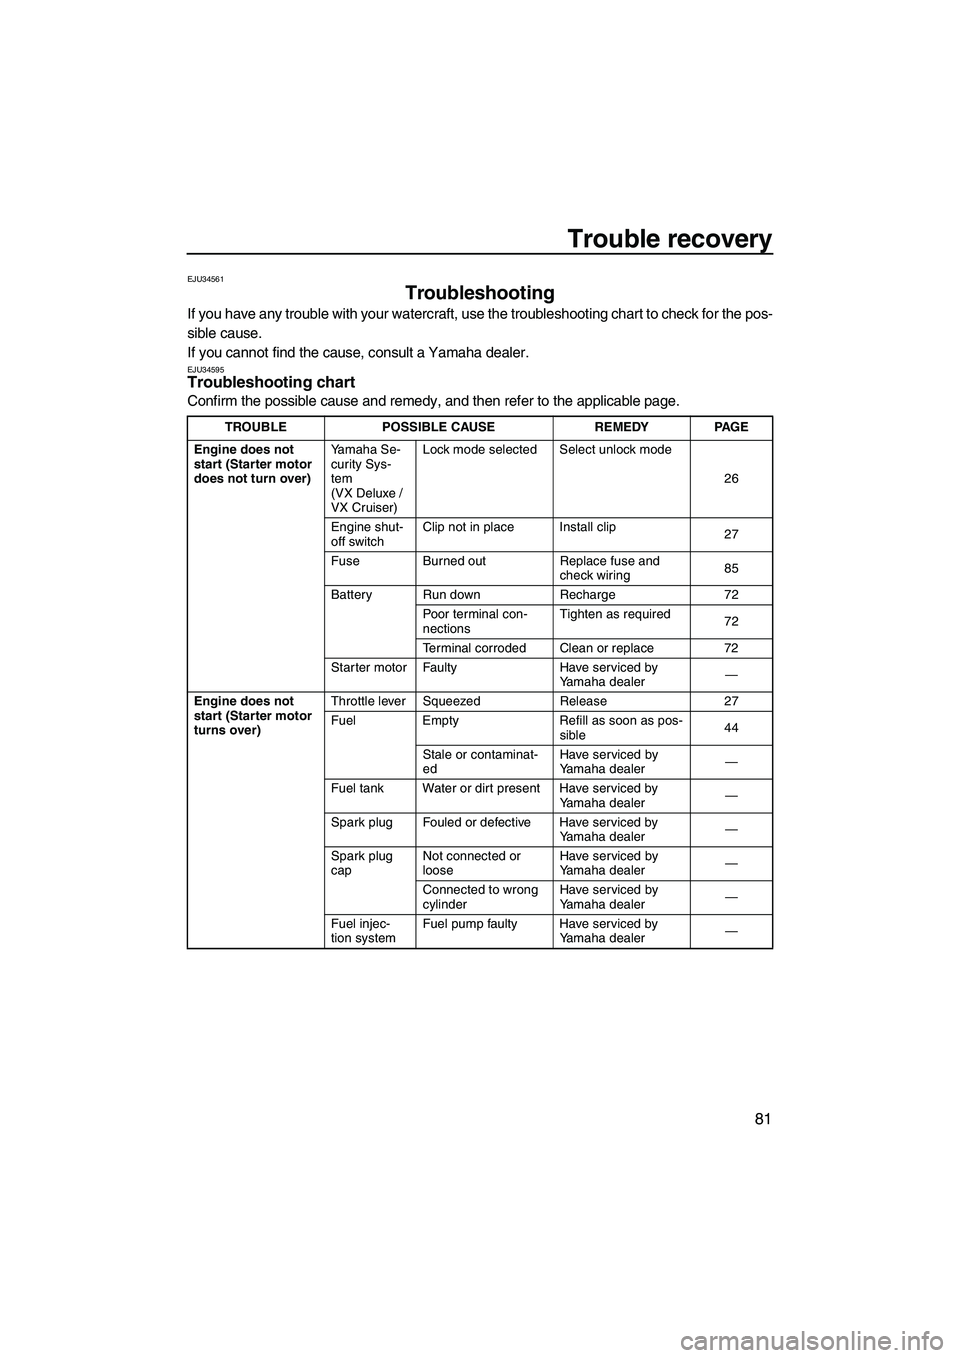 YAMAHA VX DELUXE 2013  Owners Manual Trouble recovery
81
EJU34561
Troubleshooting 
If you have any trouble with your watercraft, use the troubleshooting chart to check for the pos-
sible cause.
If you cannot find the cause, consult a Yam